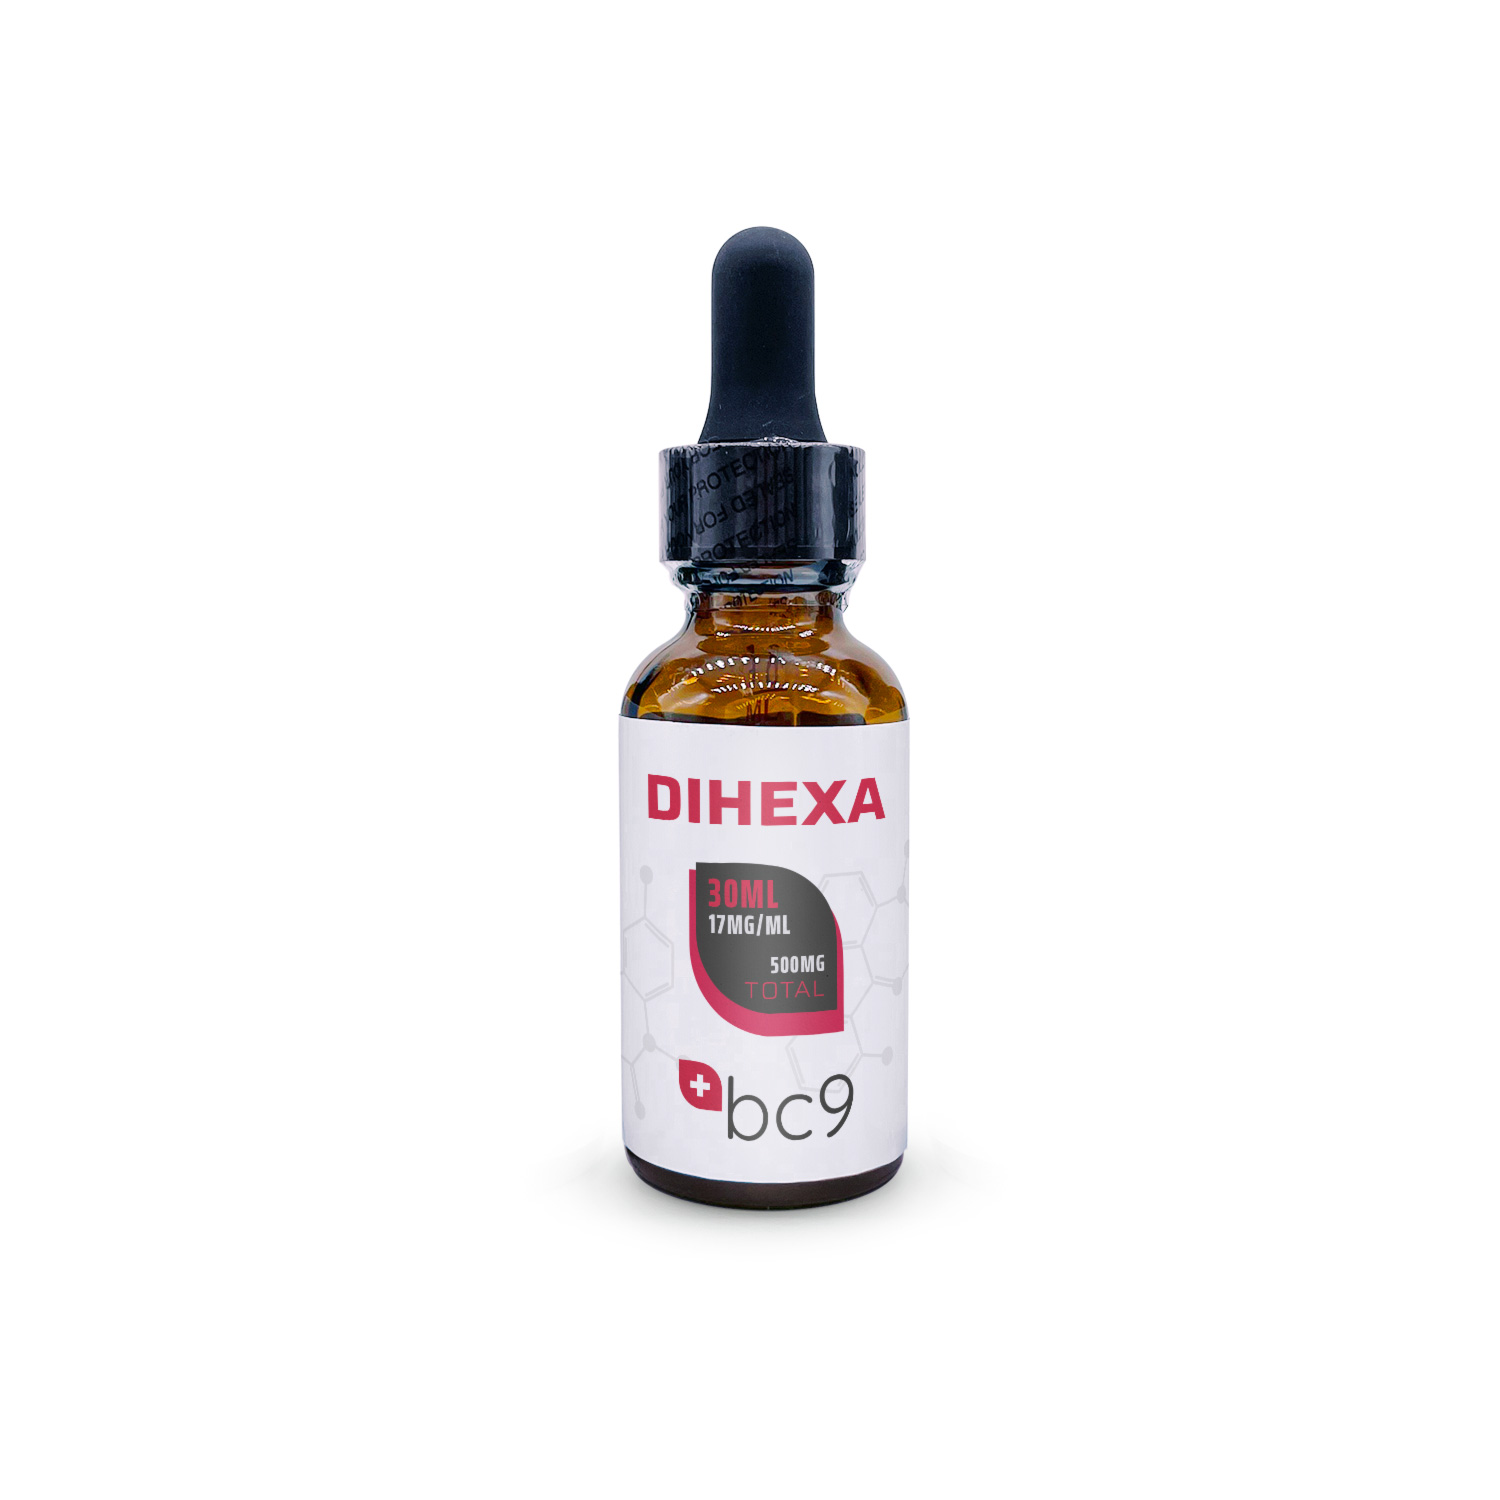 Dihexa Liquid For Sale | 3rd Party Tested | BC9.org